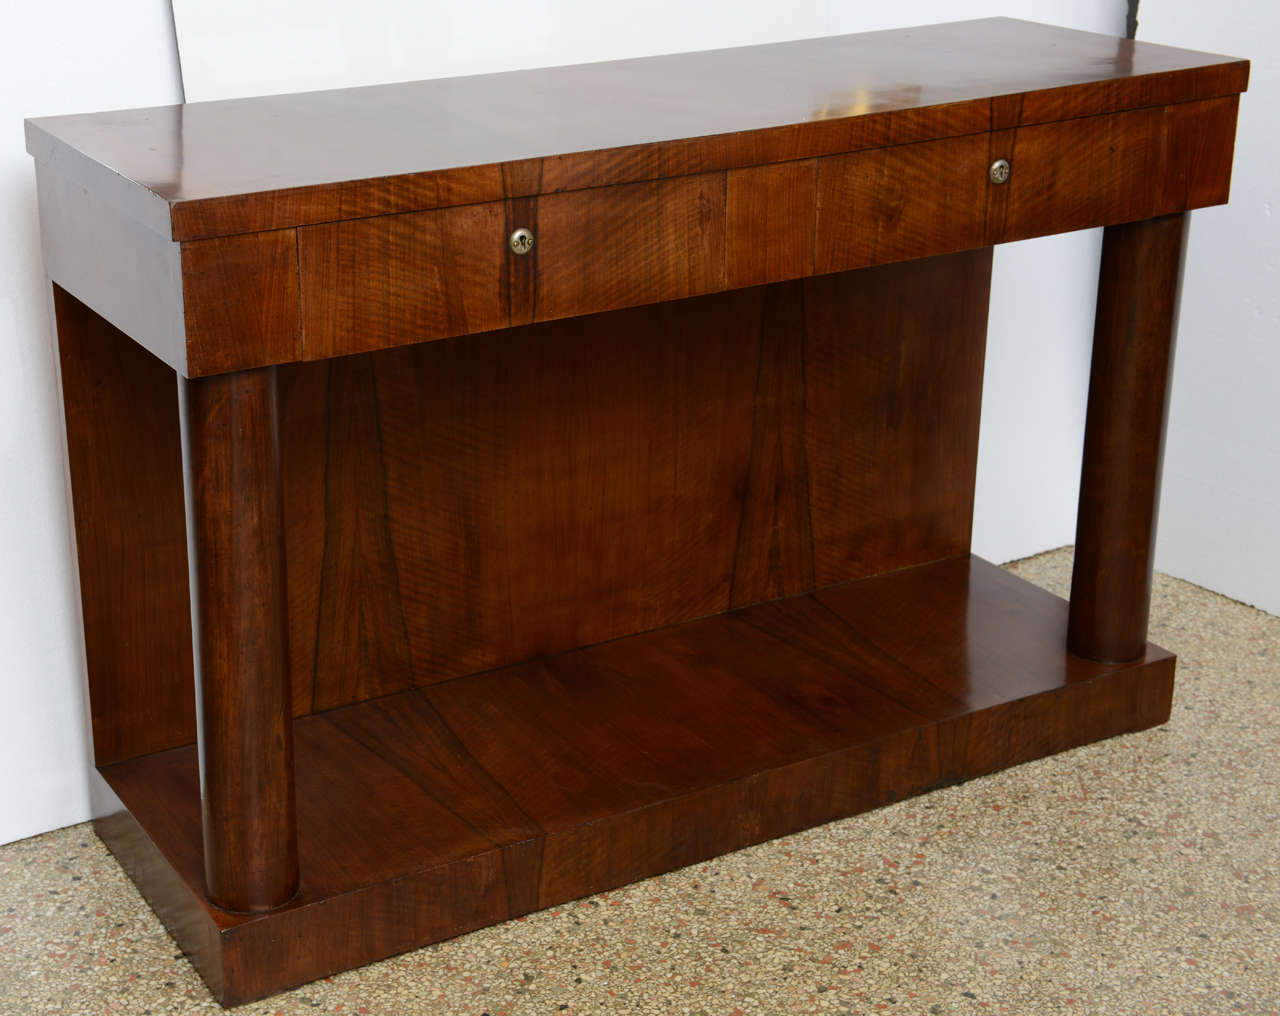 Empire Console/ Server with Two Drawers; hand crafted in figured walnut with bronze mounts on the columns; excellent working surface, original restored finish

Originally $ 7,400.00